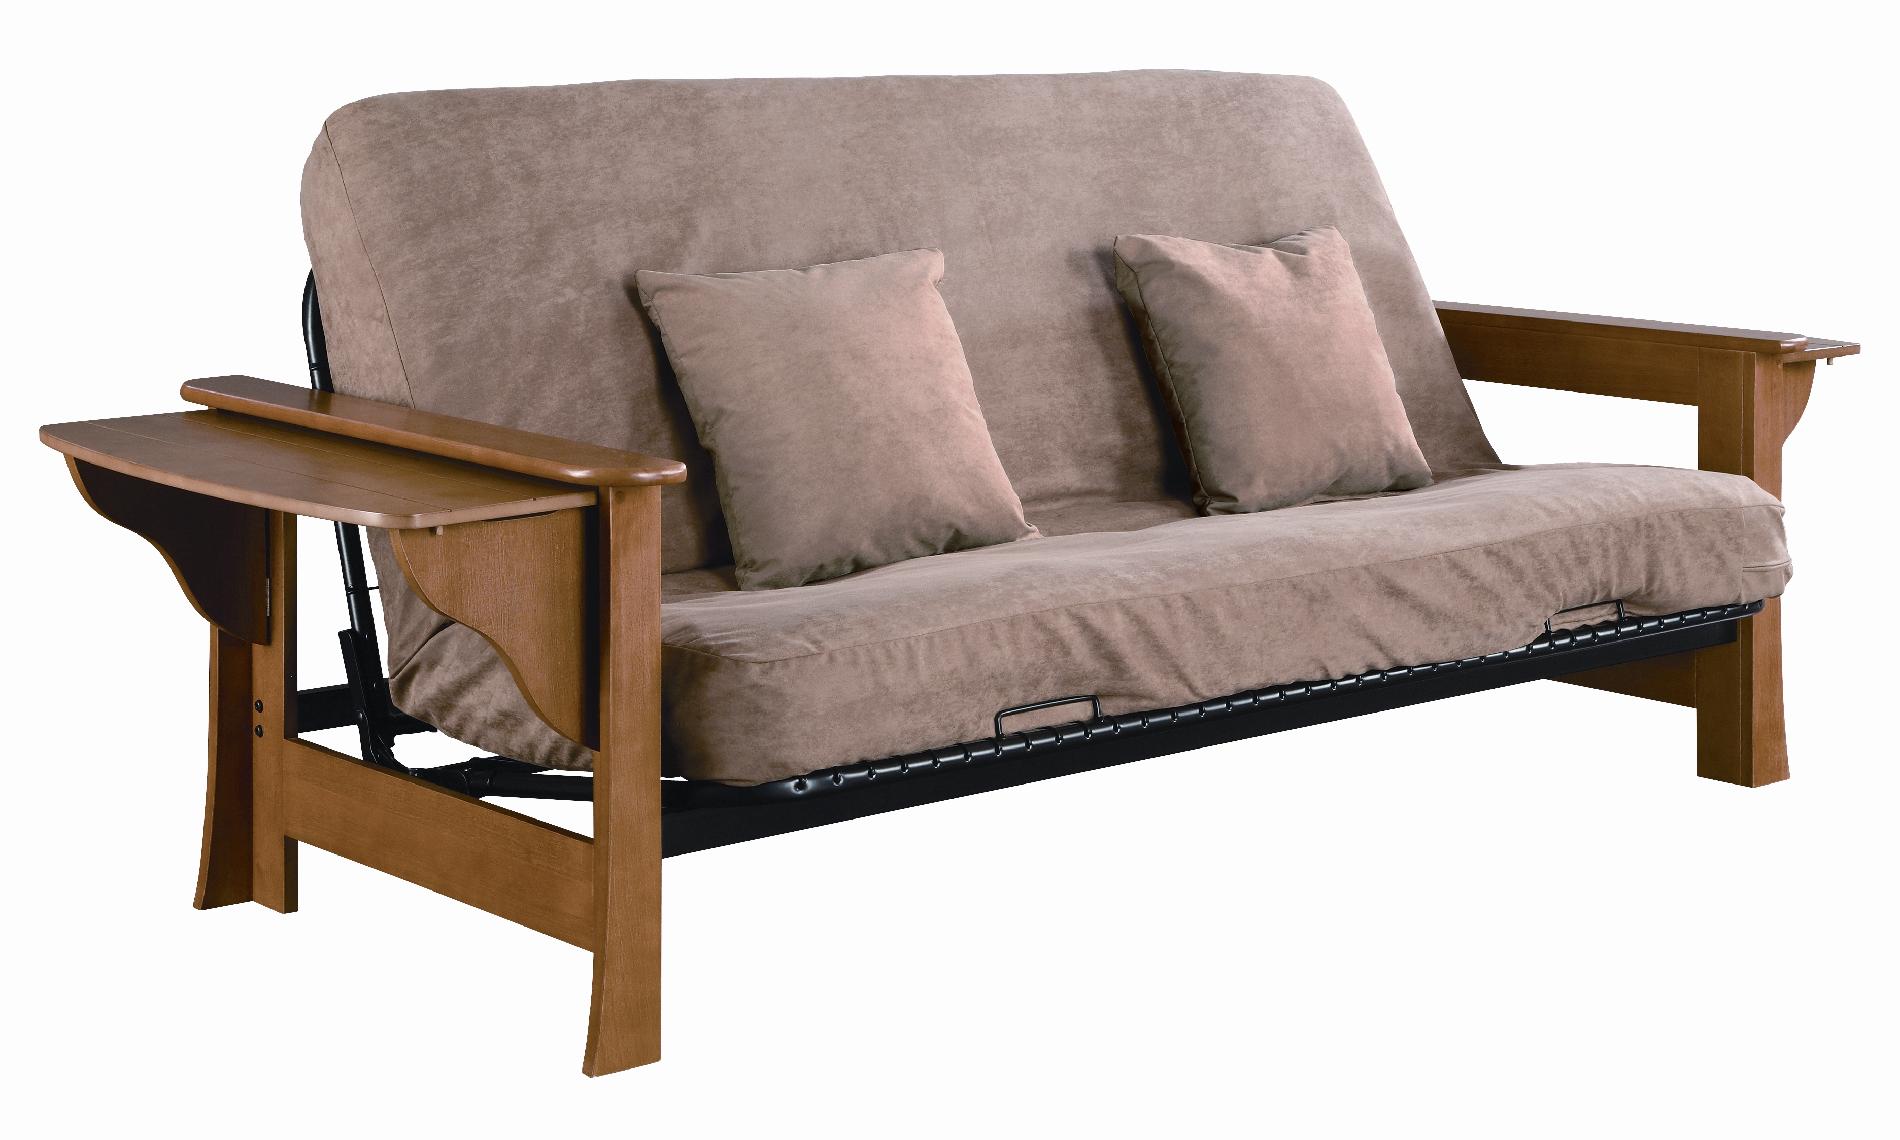 Tuscany Futon Frame Queen Size